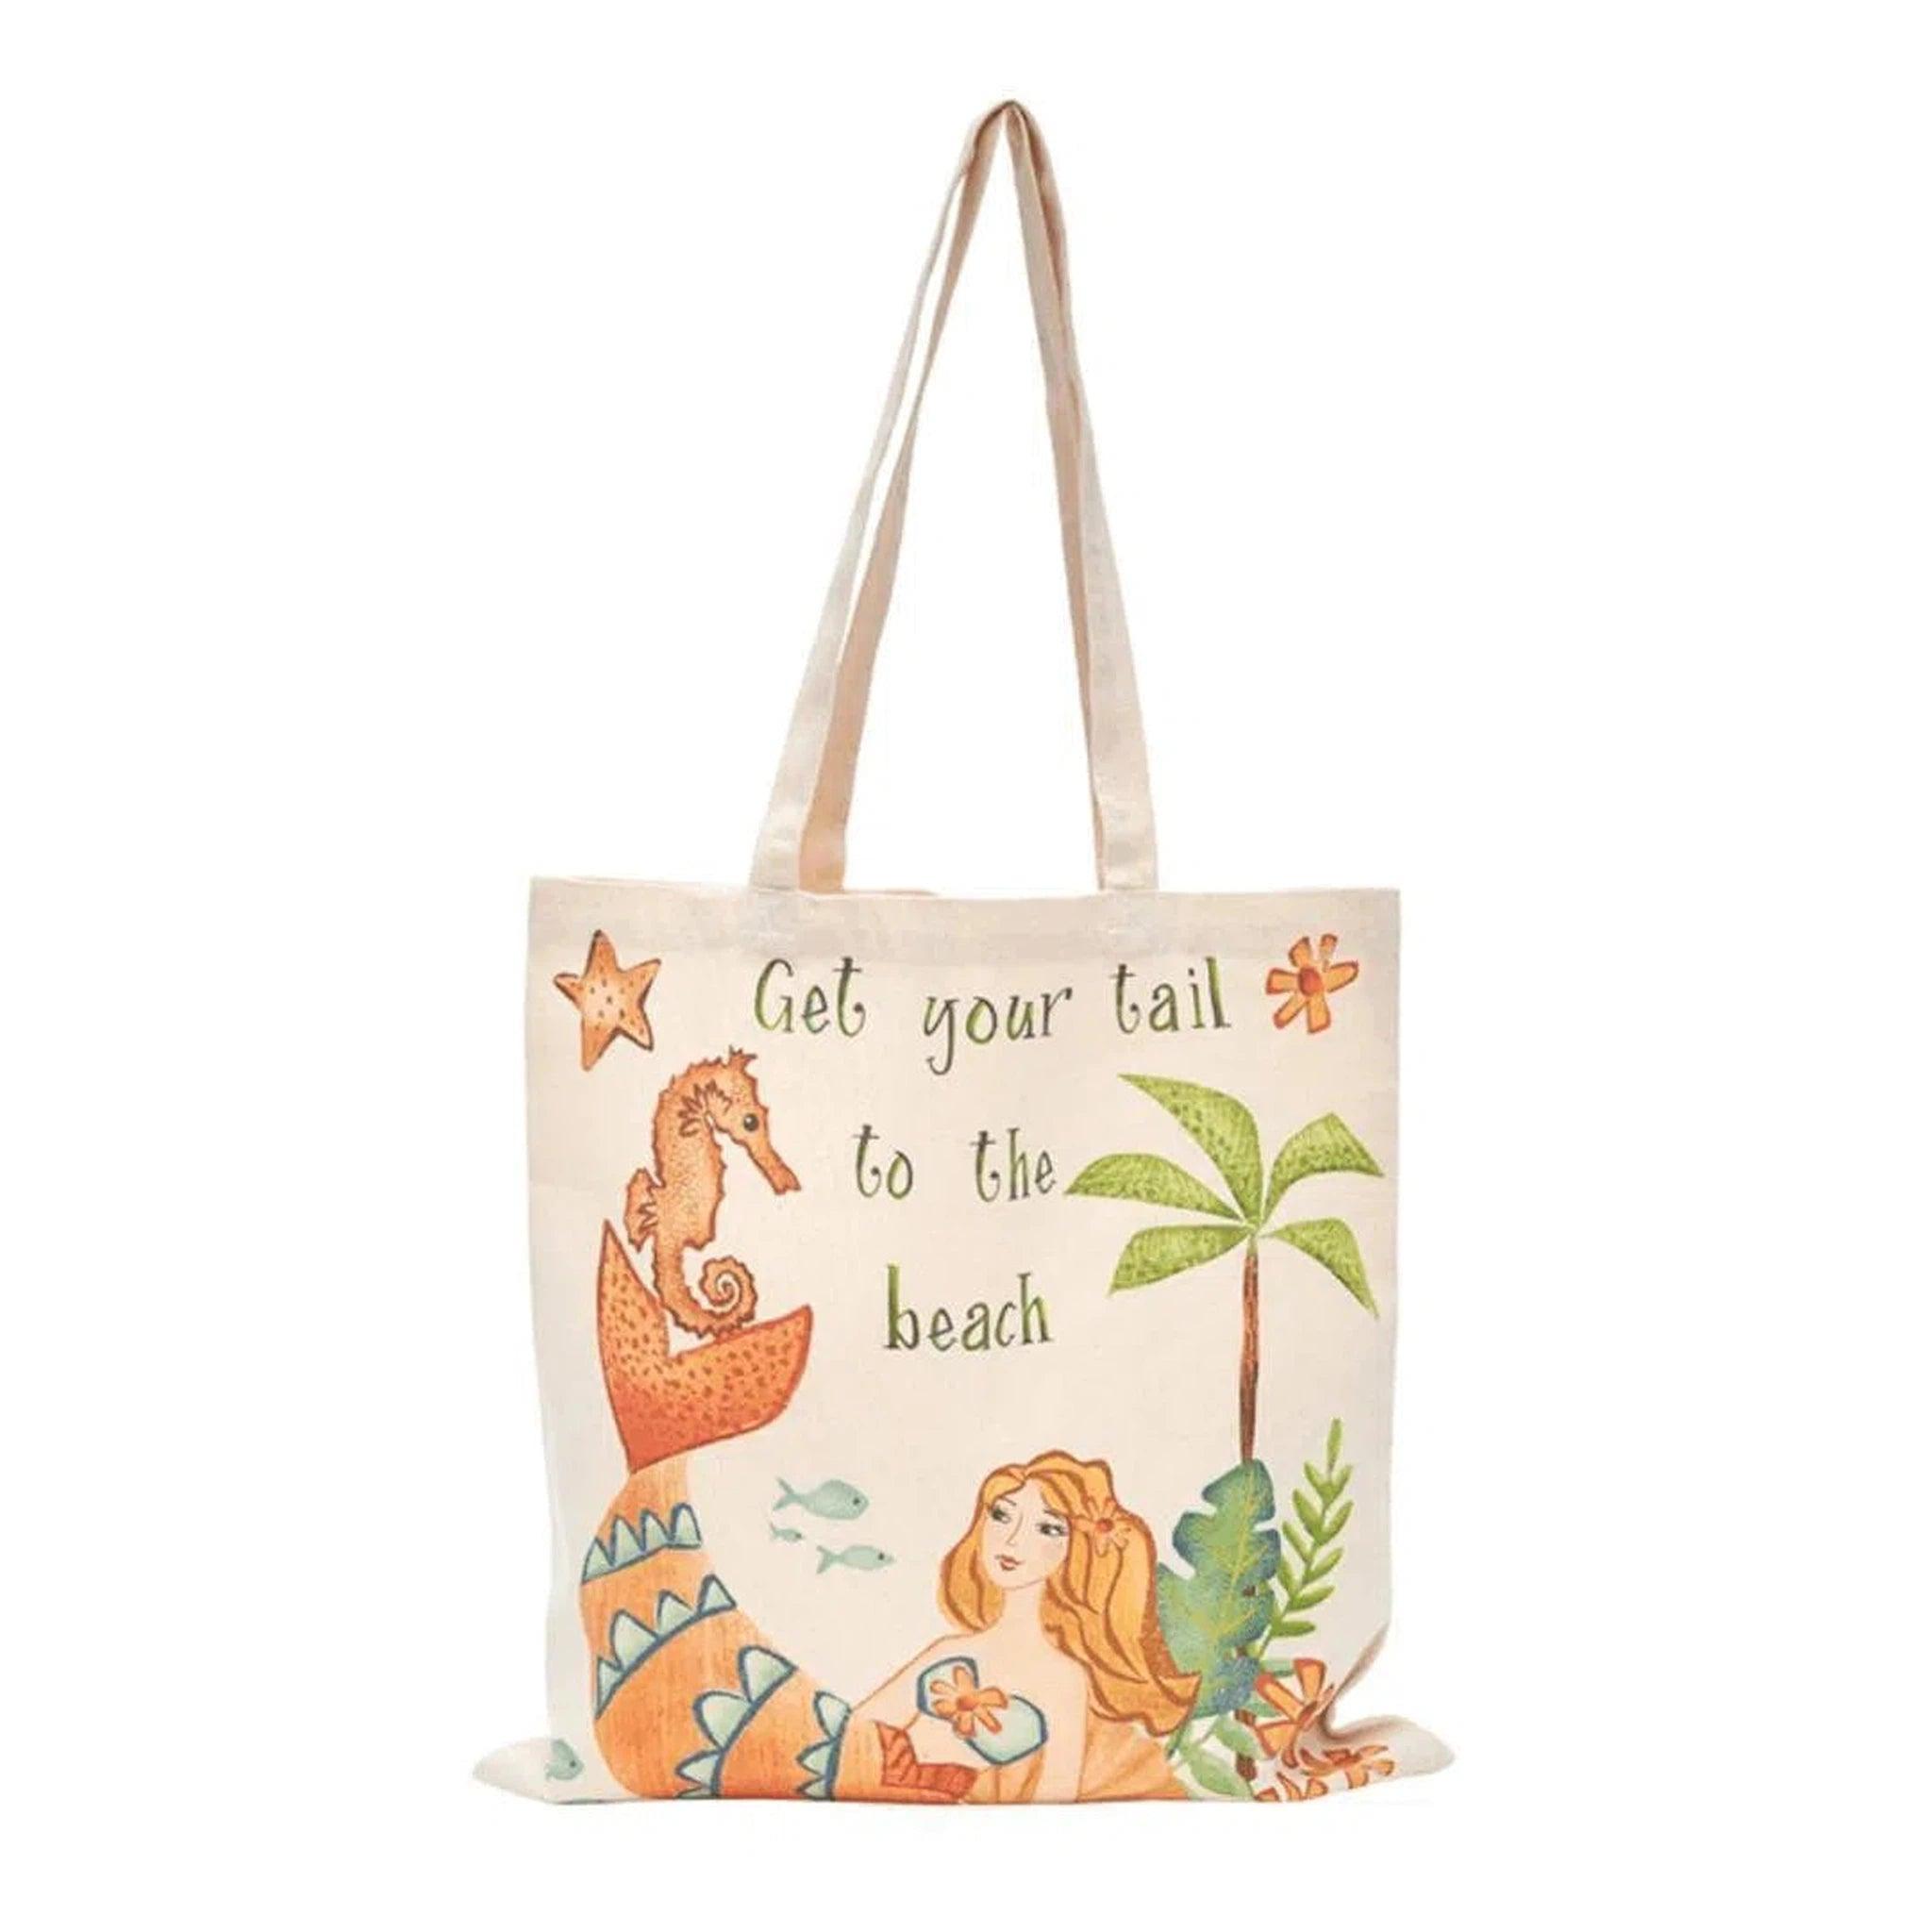 Get Your Tail to The Beach Mermaid Tote Bag